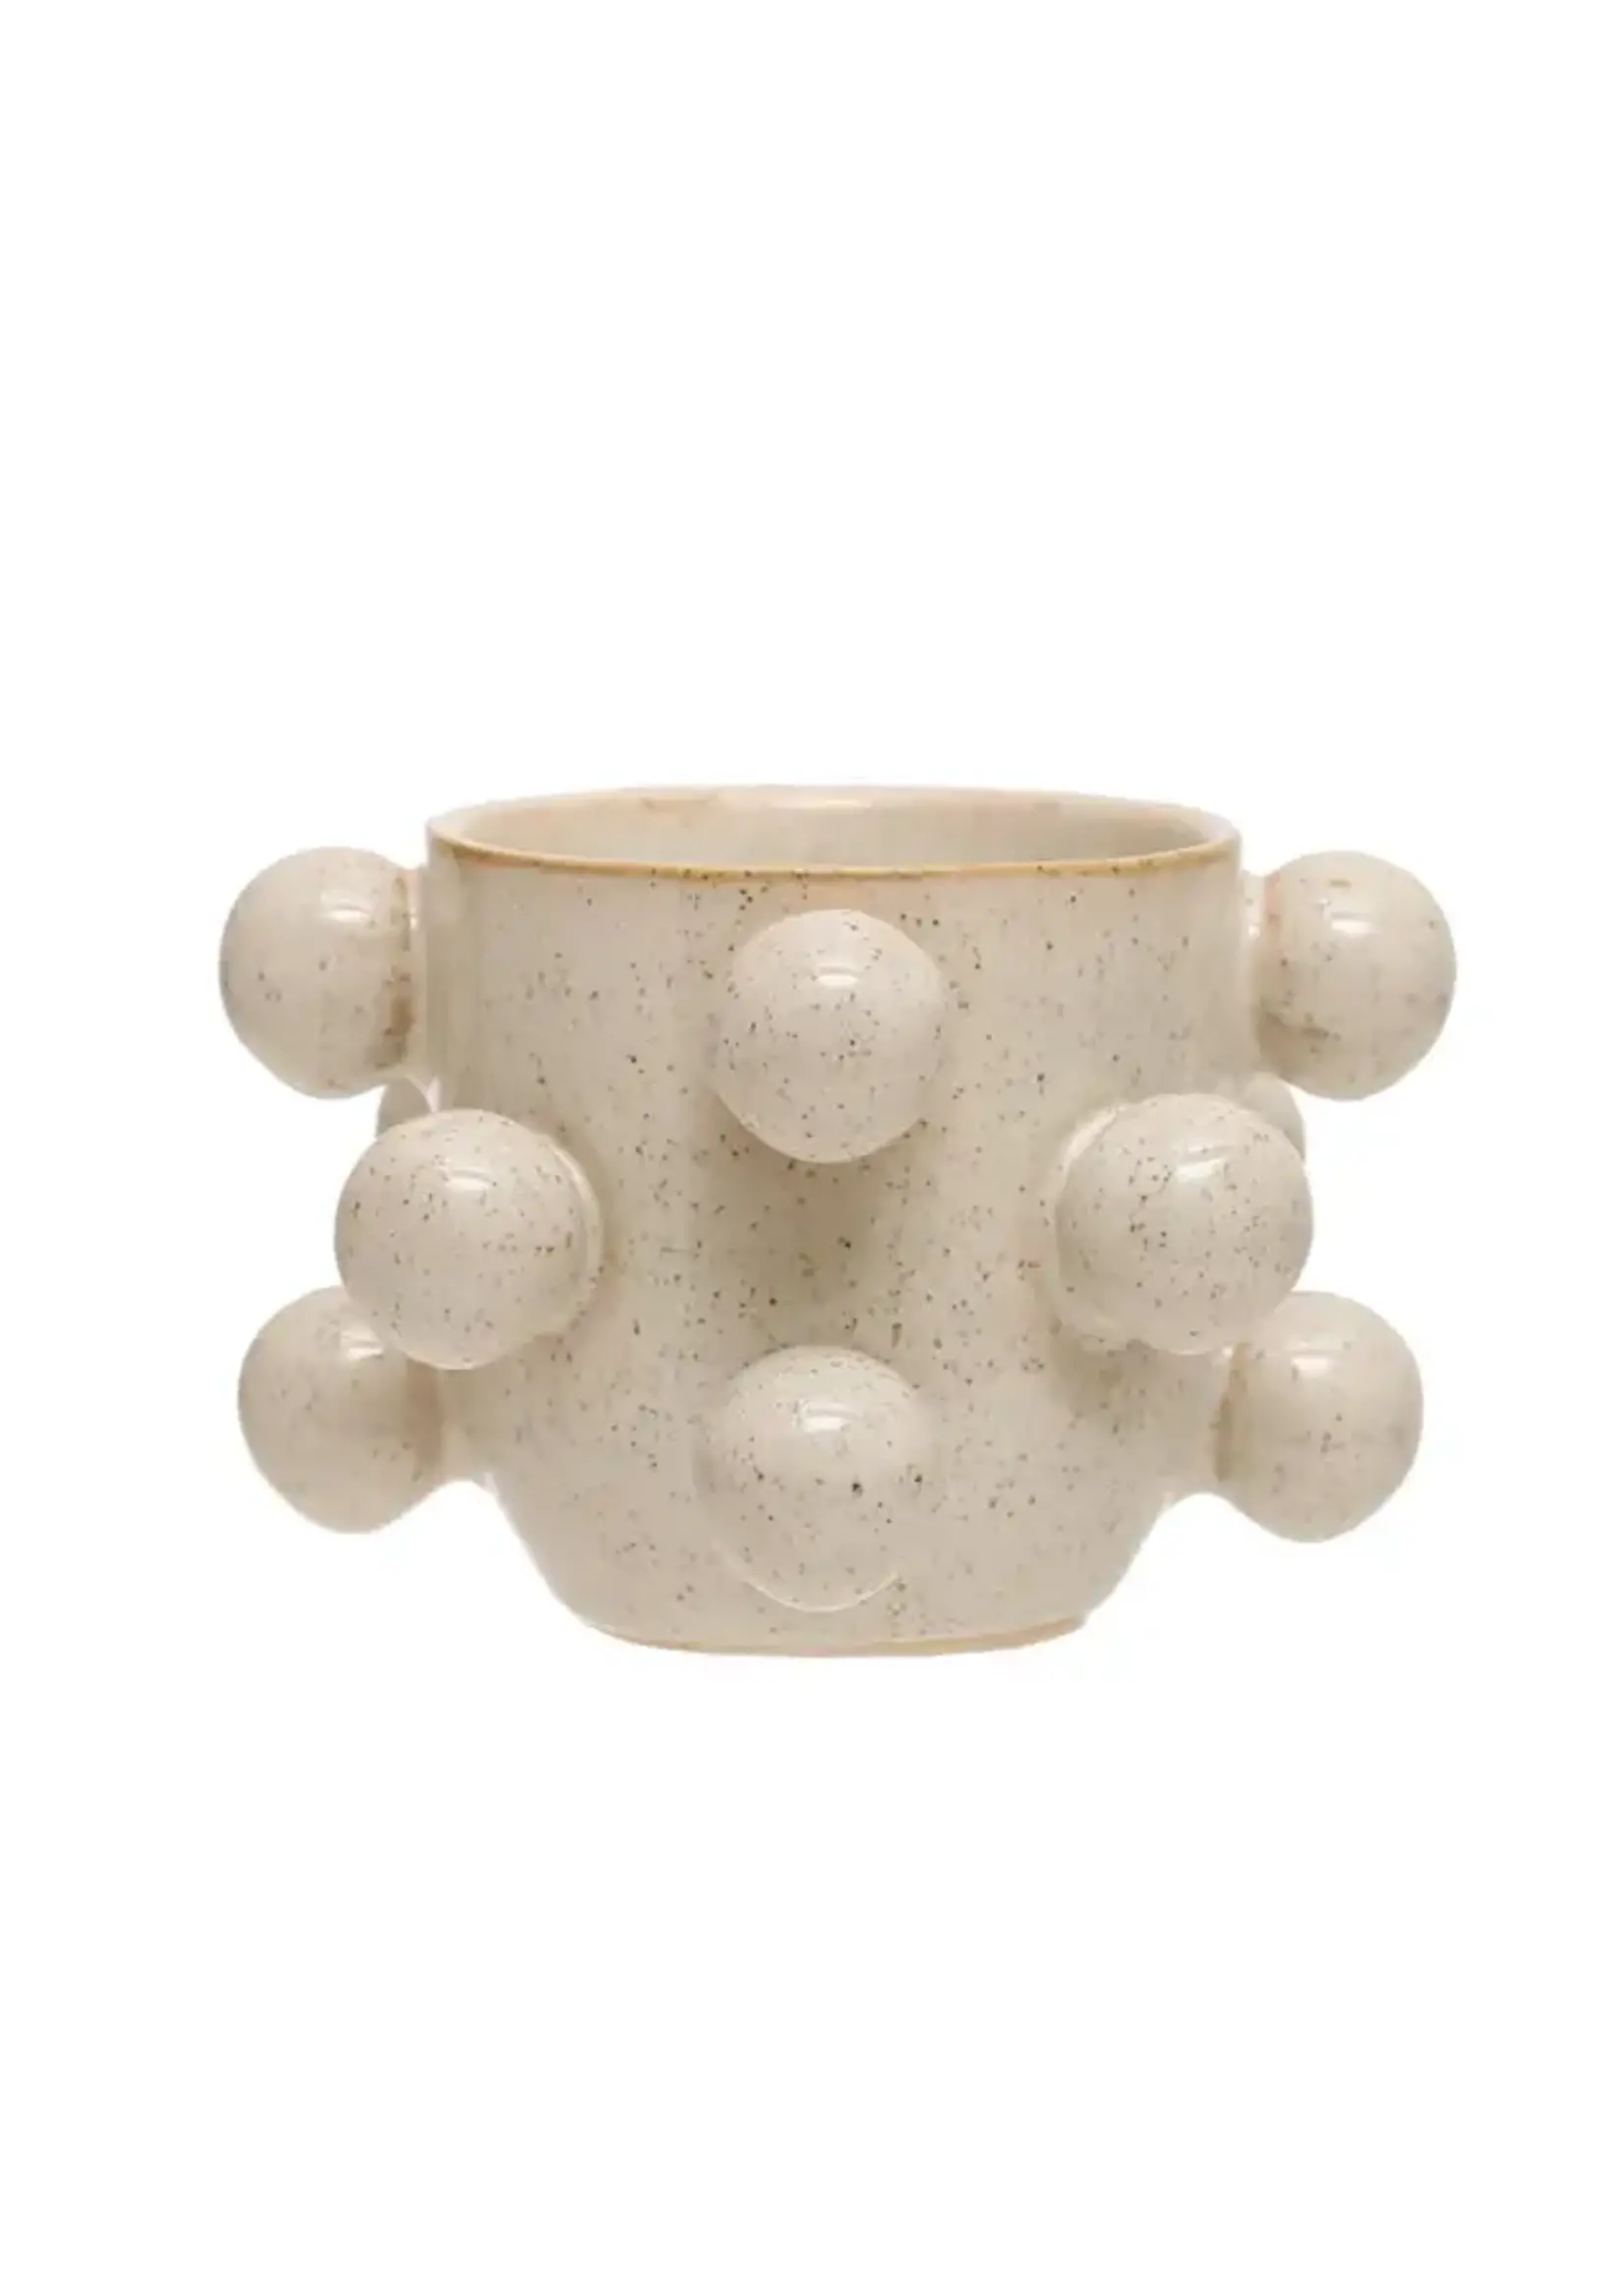 Stoneware Planter with Orbs